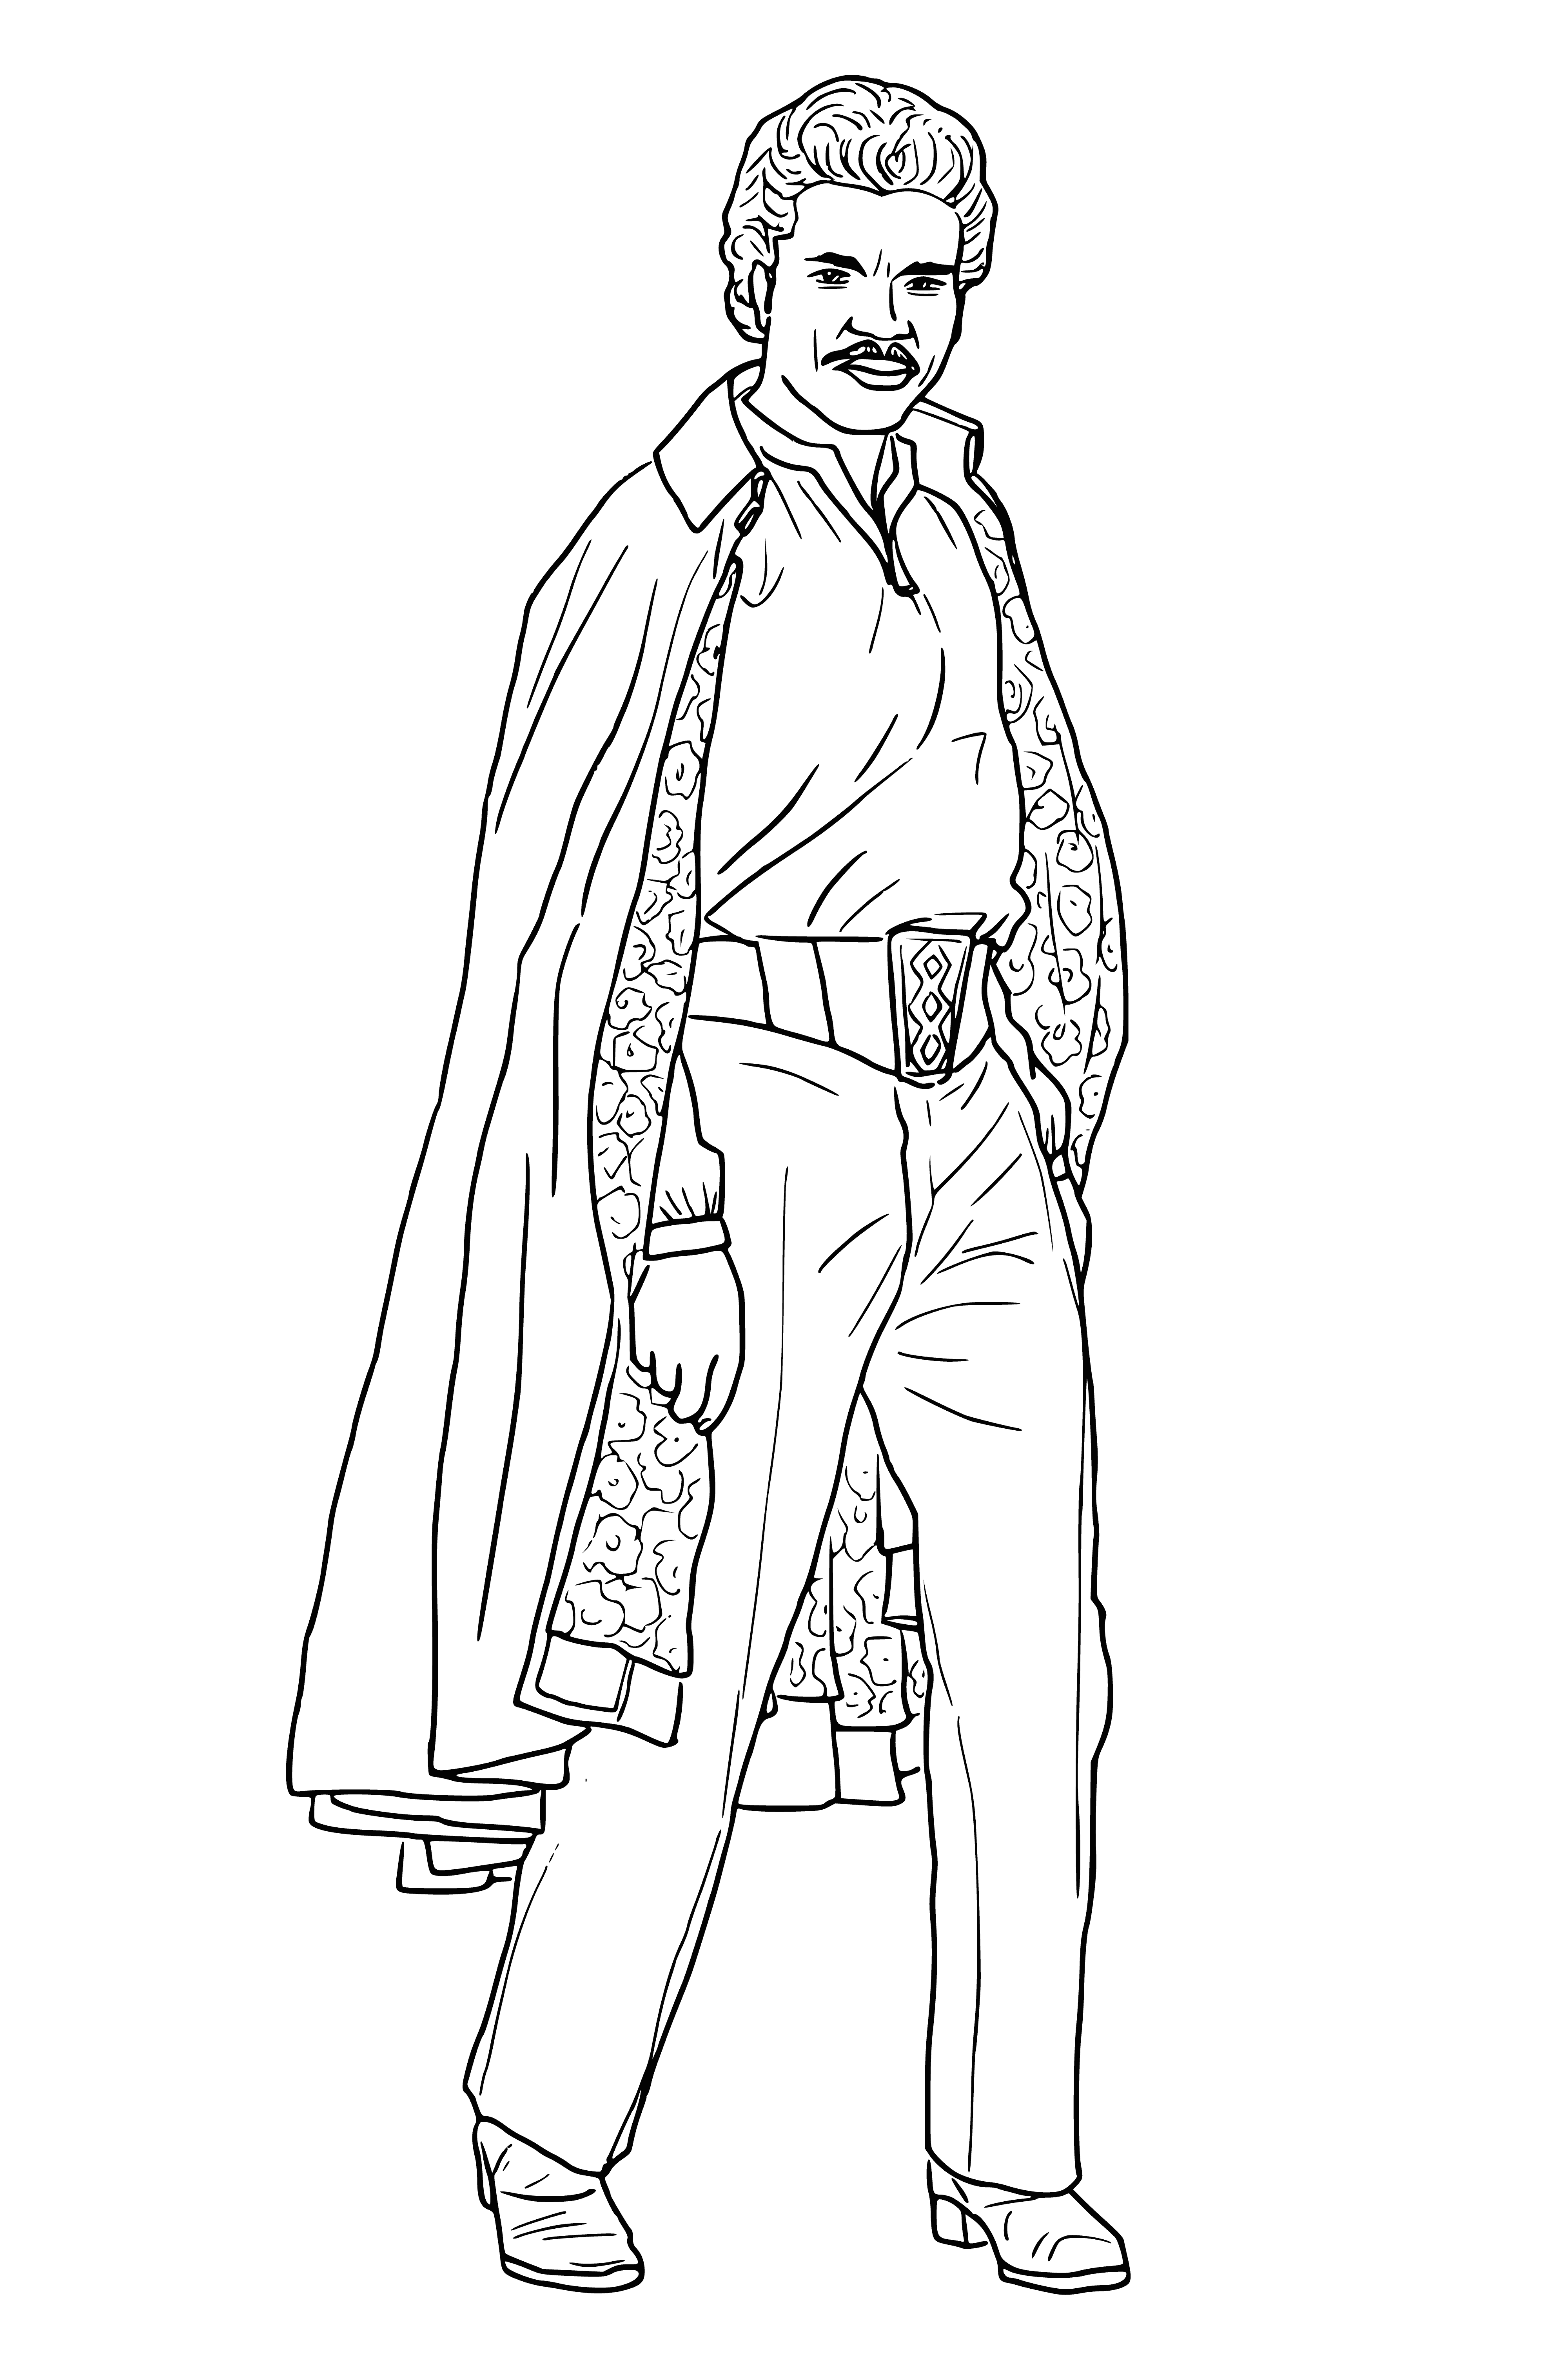 coloring page: Lando stands serious with dark/light outfit & scarf.